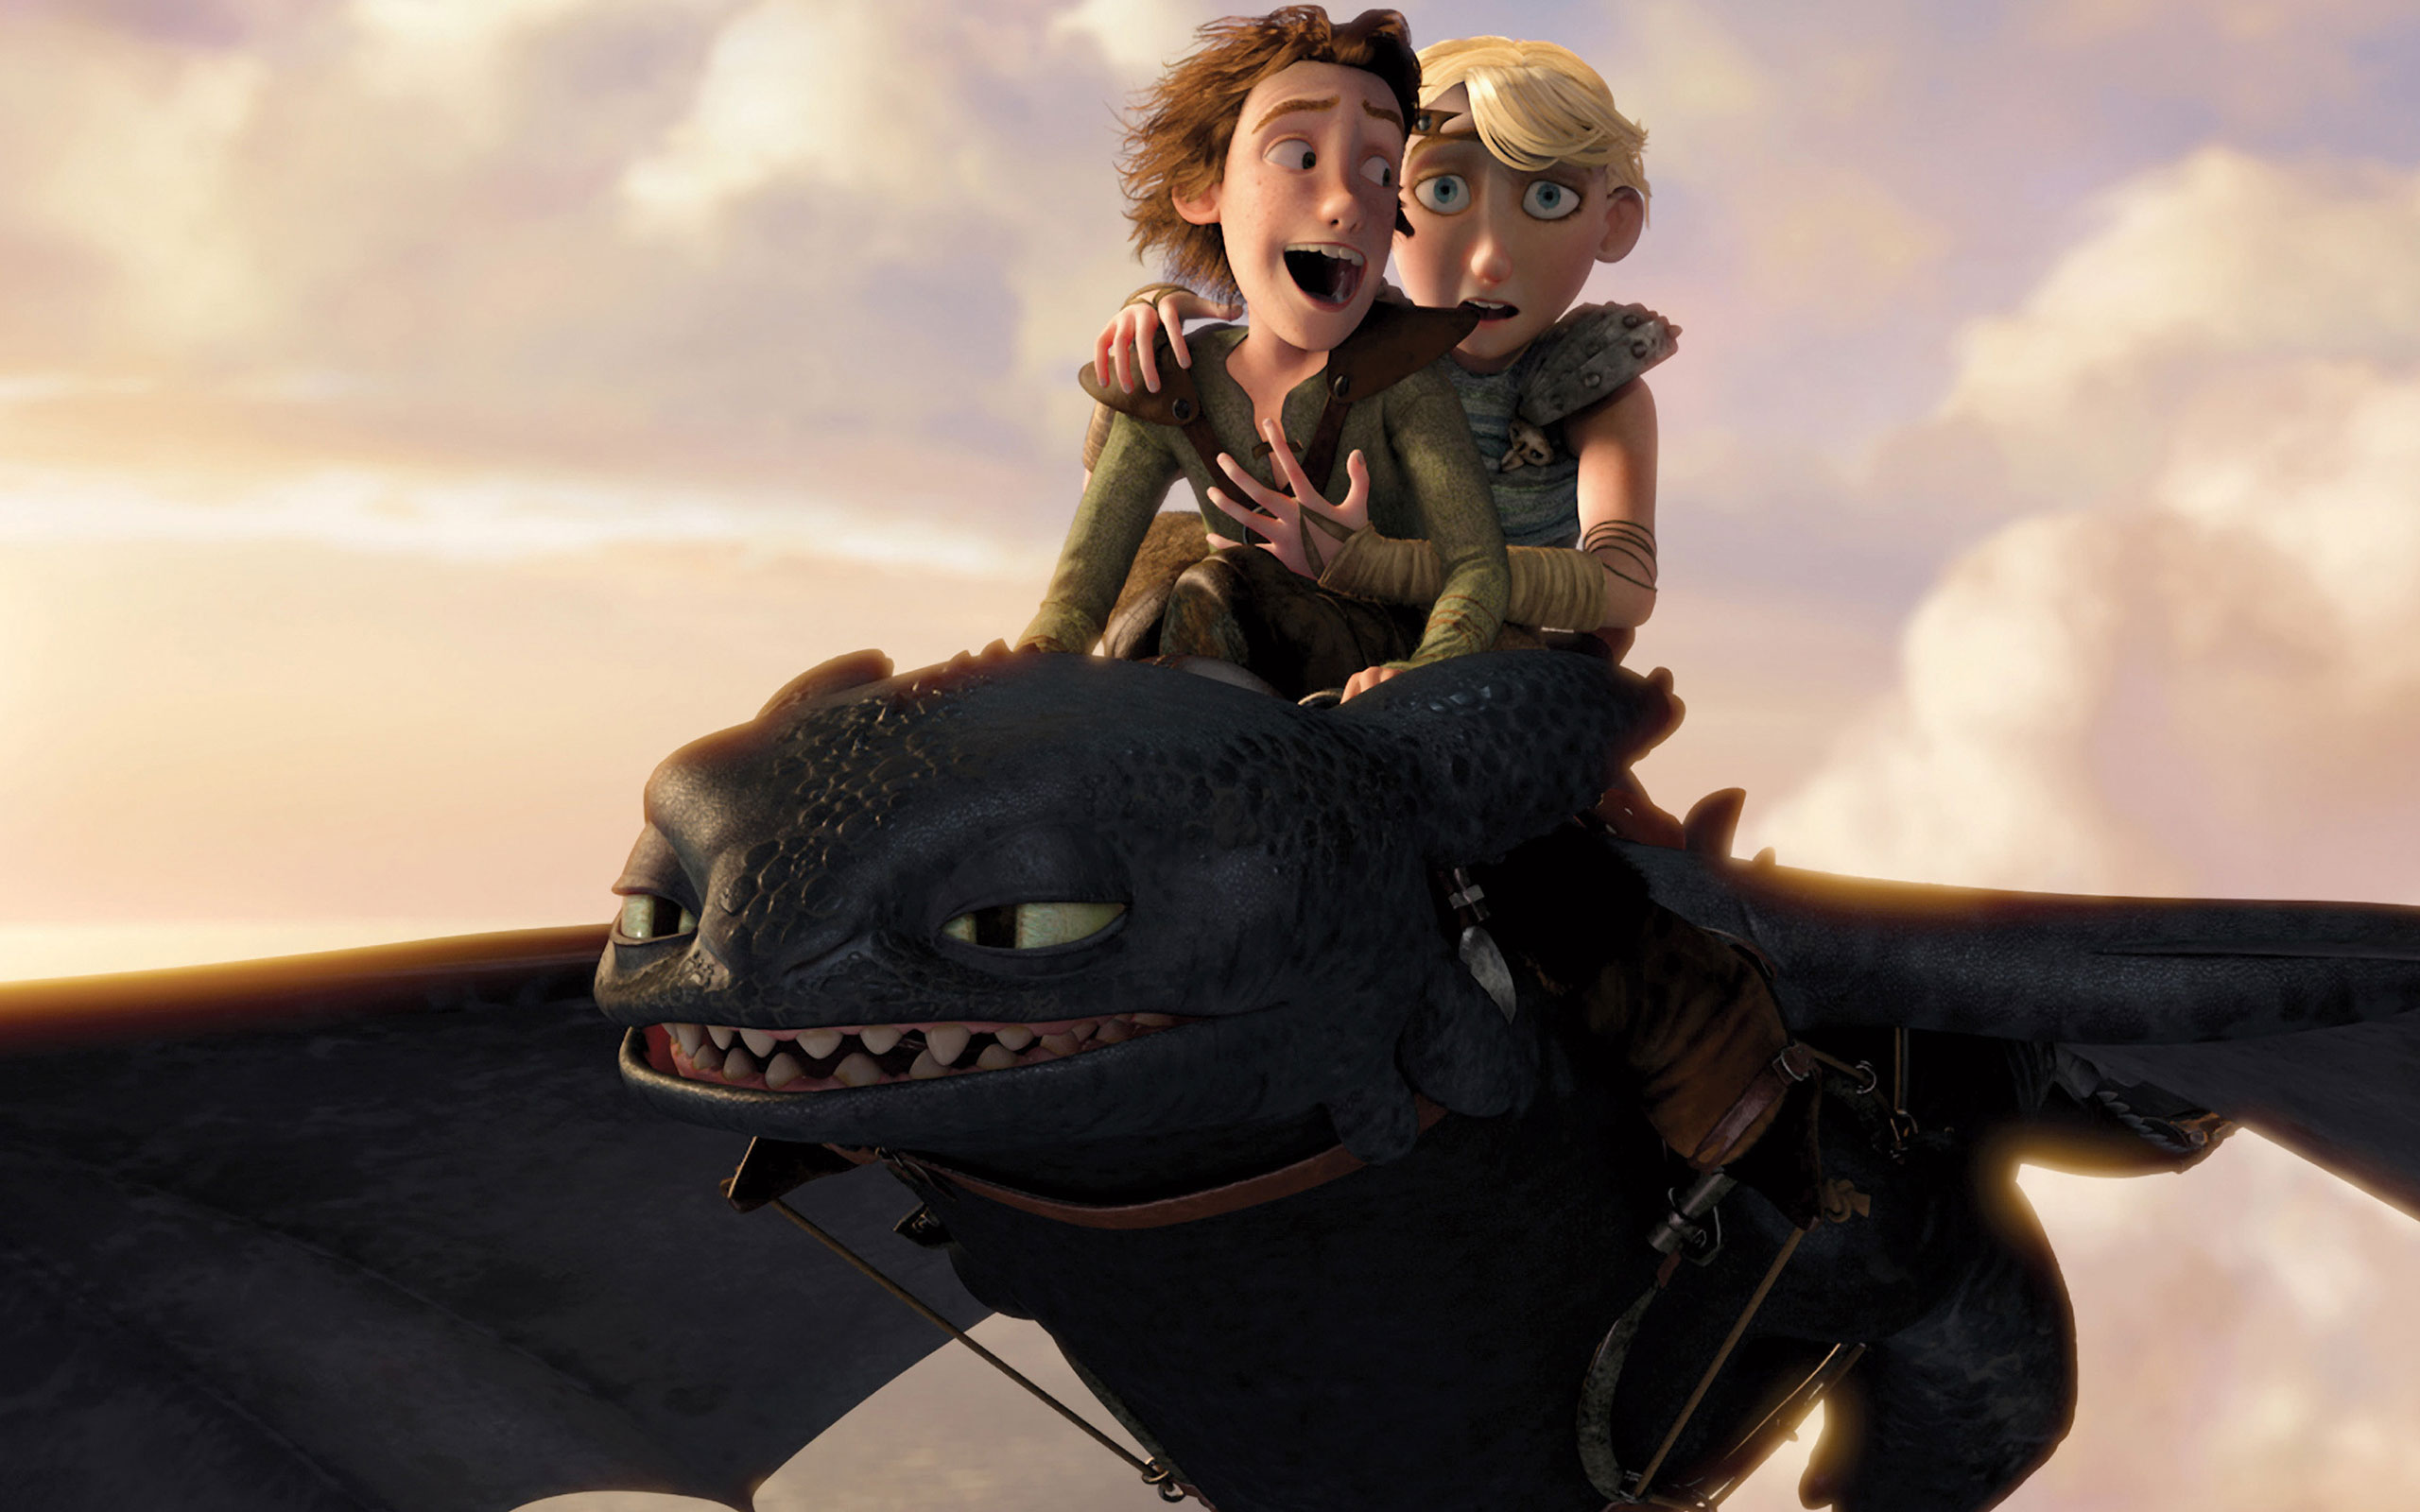 how to train your dragon, toothless (how to train your dragon), movie, astrid (how to train your dragon), hiccup (how to train your dragon)